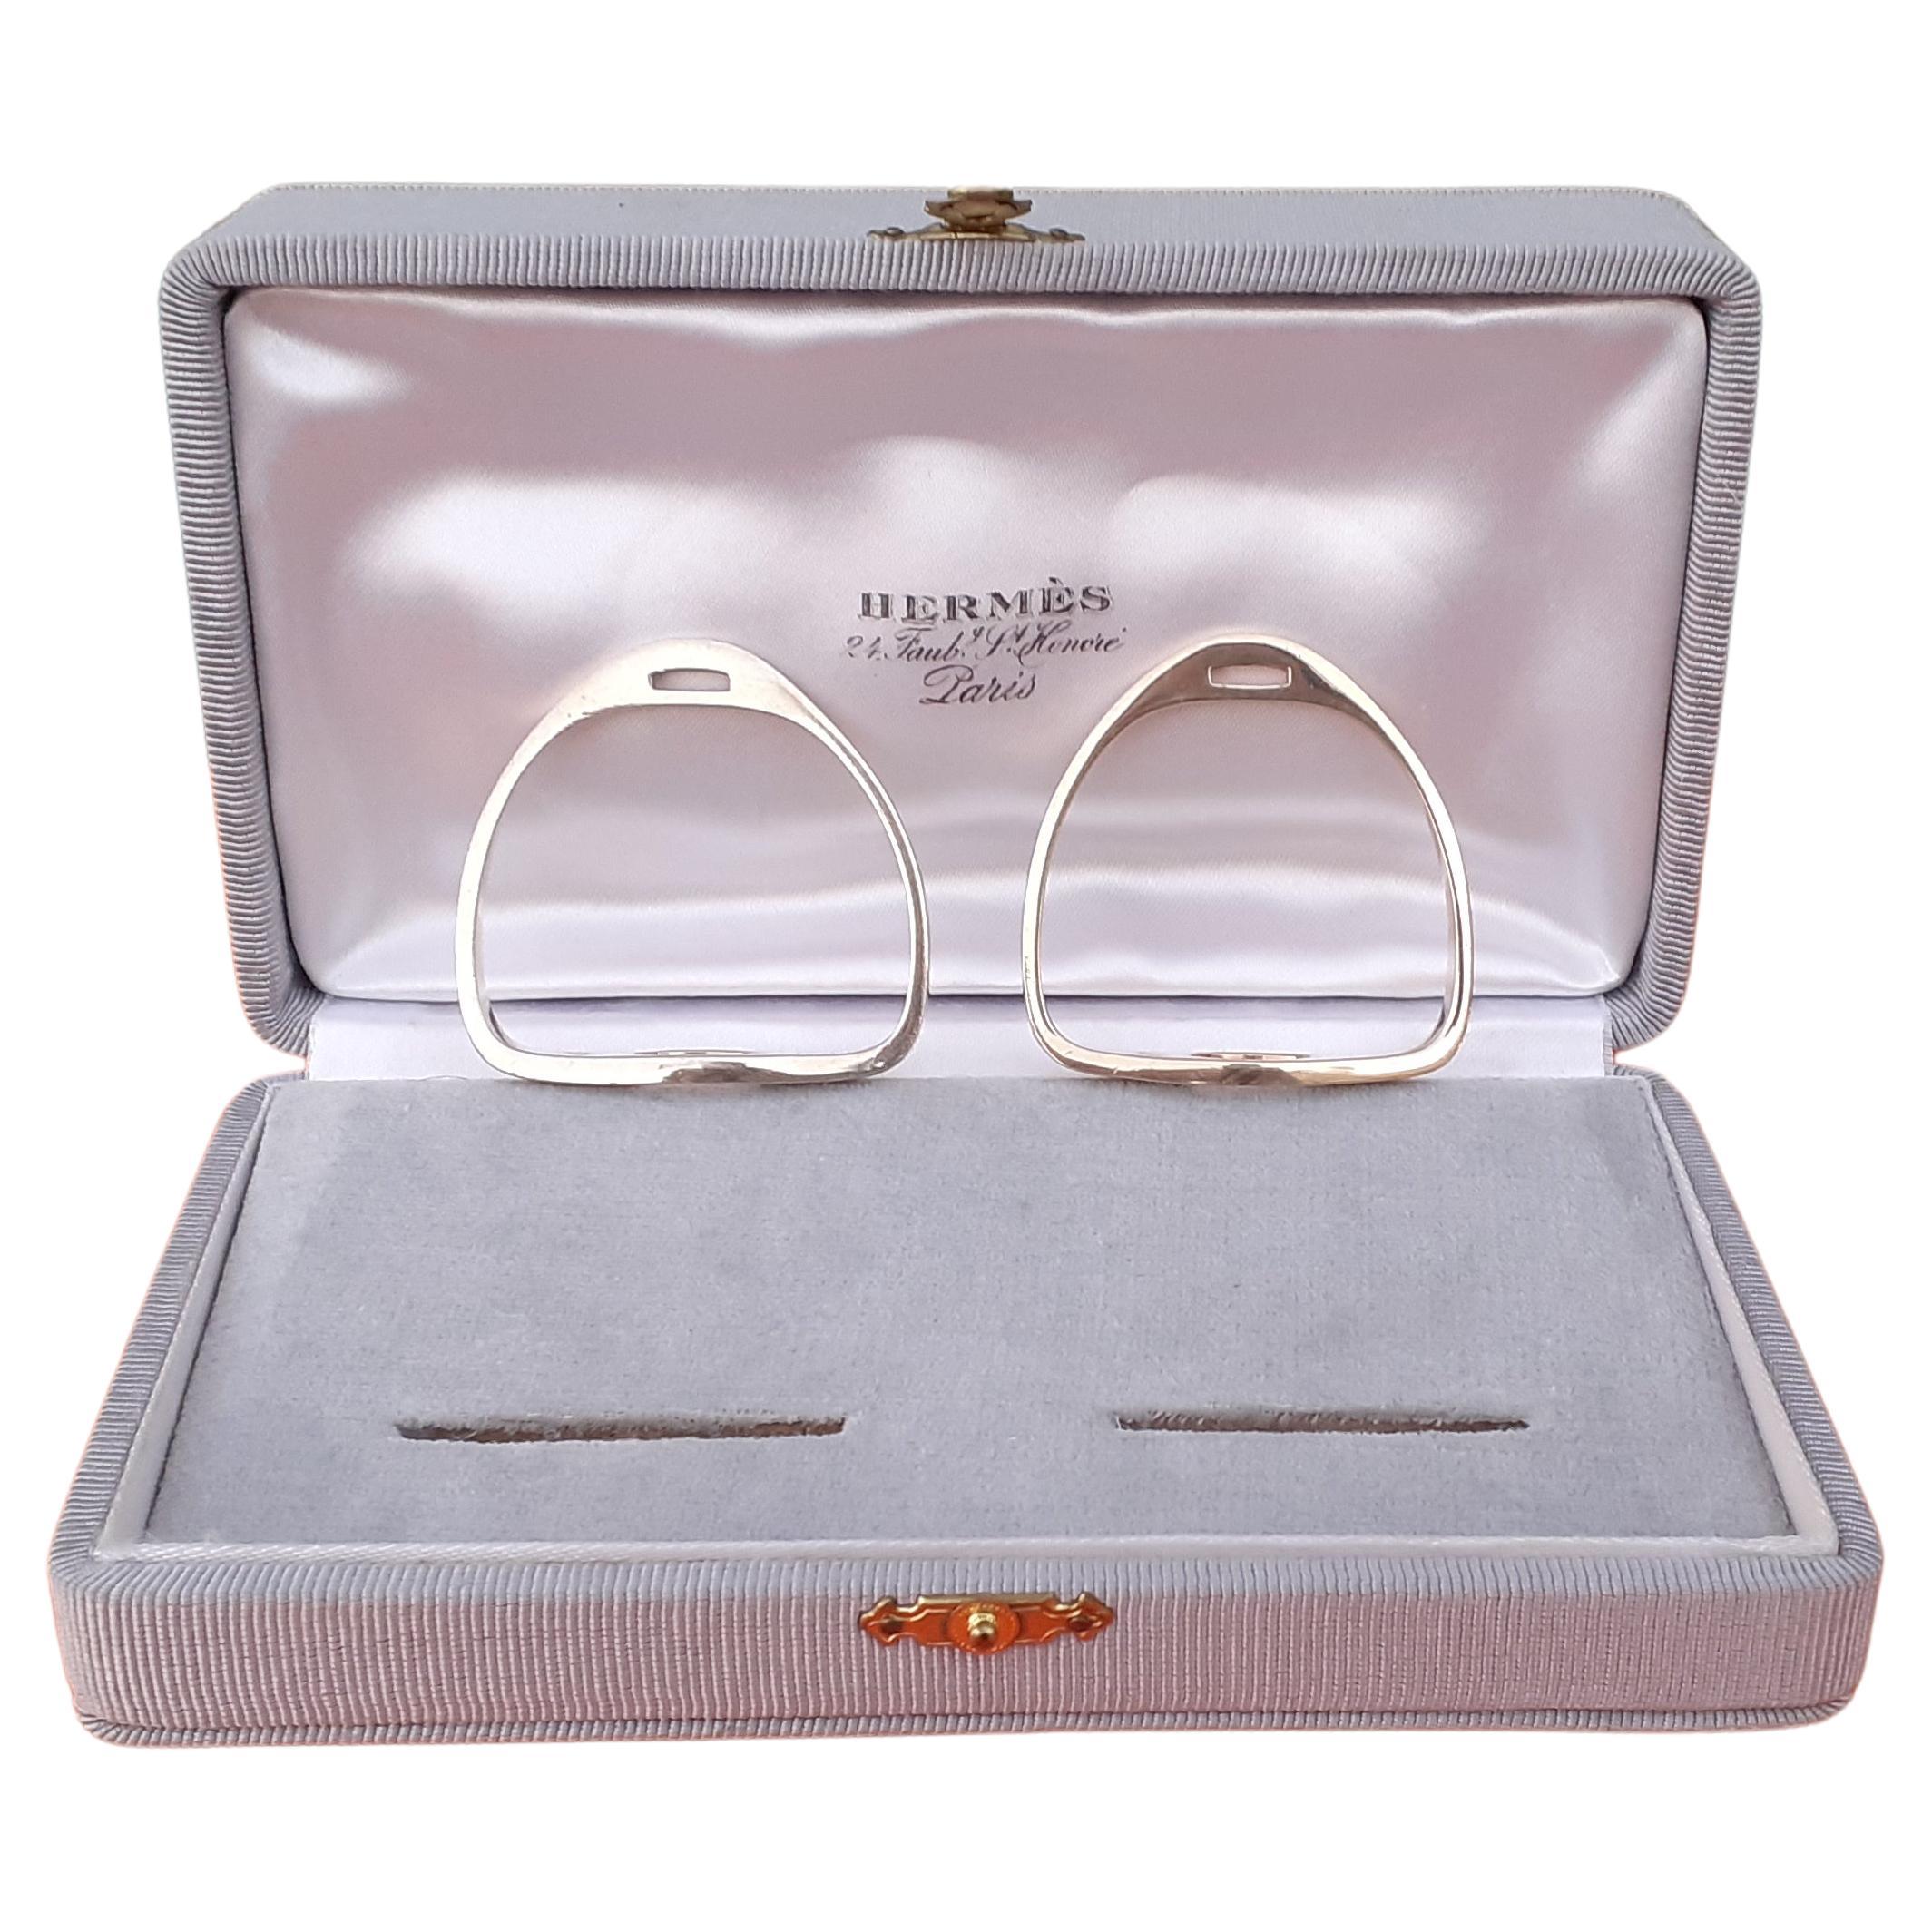 Exceptional Hermès Set of 2 Napkin Rings Stirrups Shaped in Silver-Gilt Texas For Sale